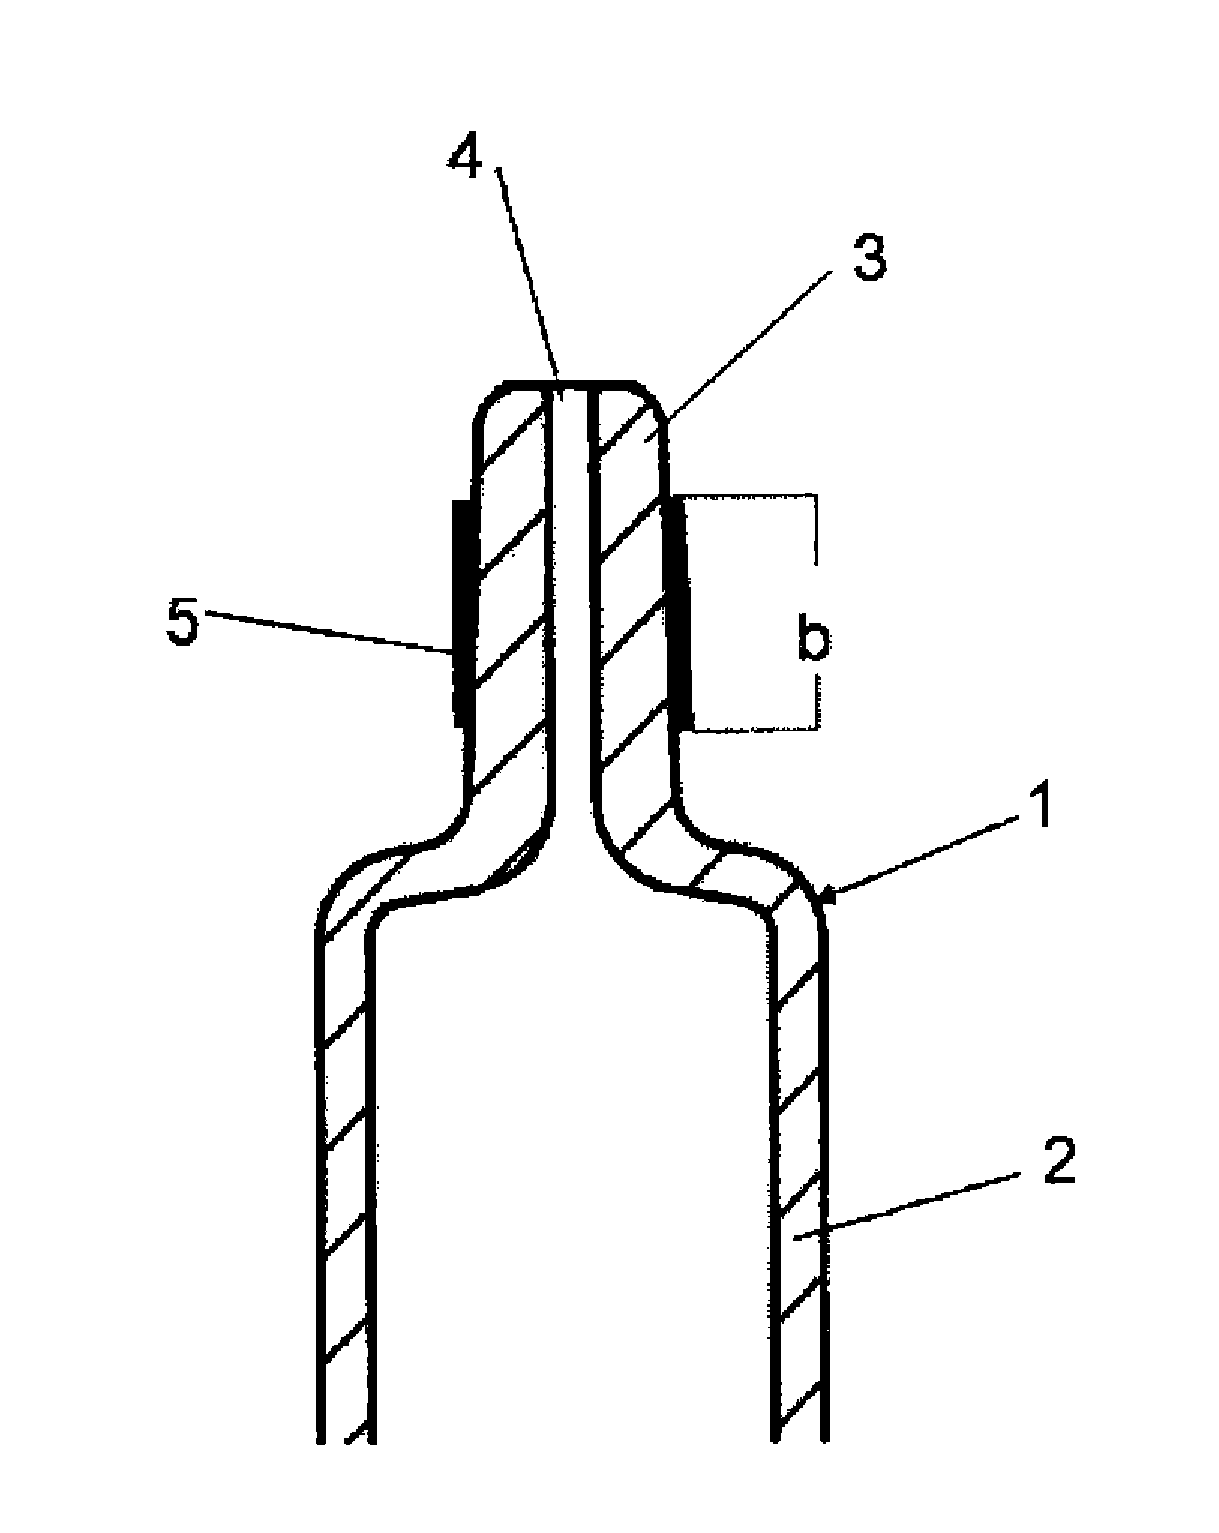 Borosilicate glass syringe with cone coating that increases surface roughness